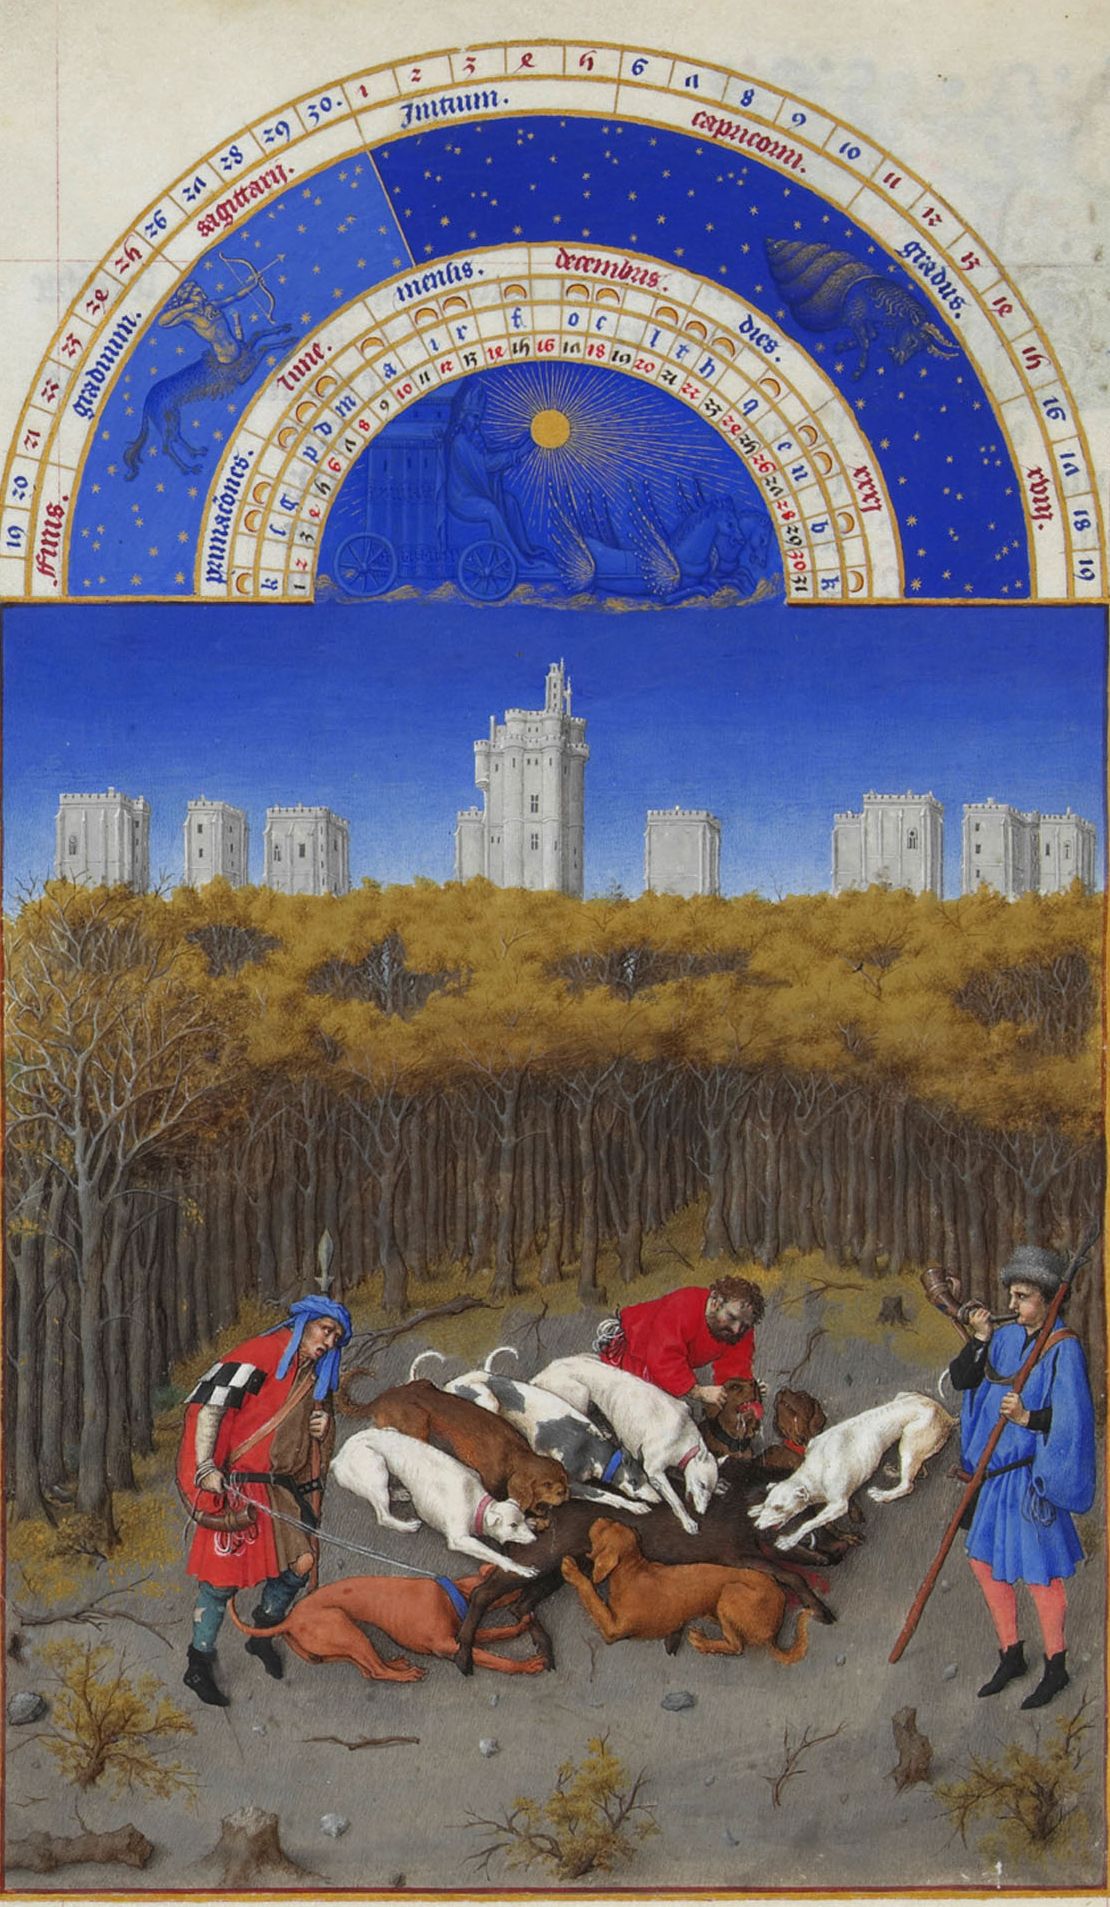 Limbourg Brothers, "The Book of Hours." Hunting.